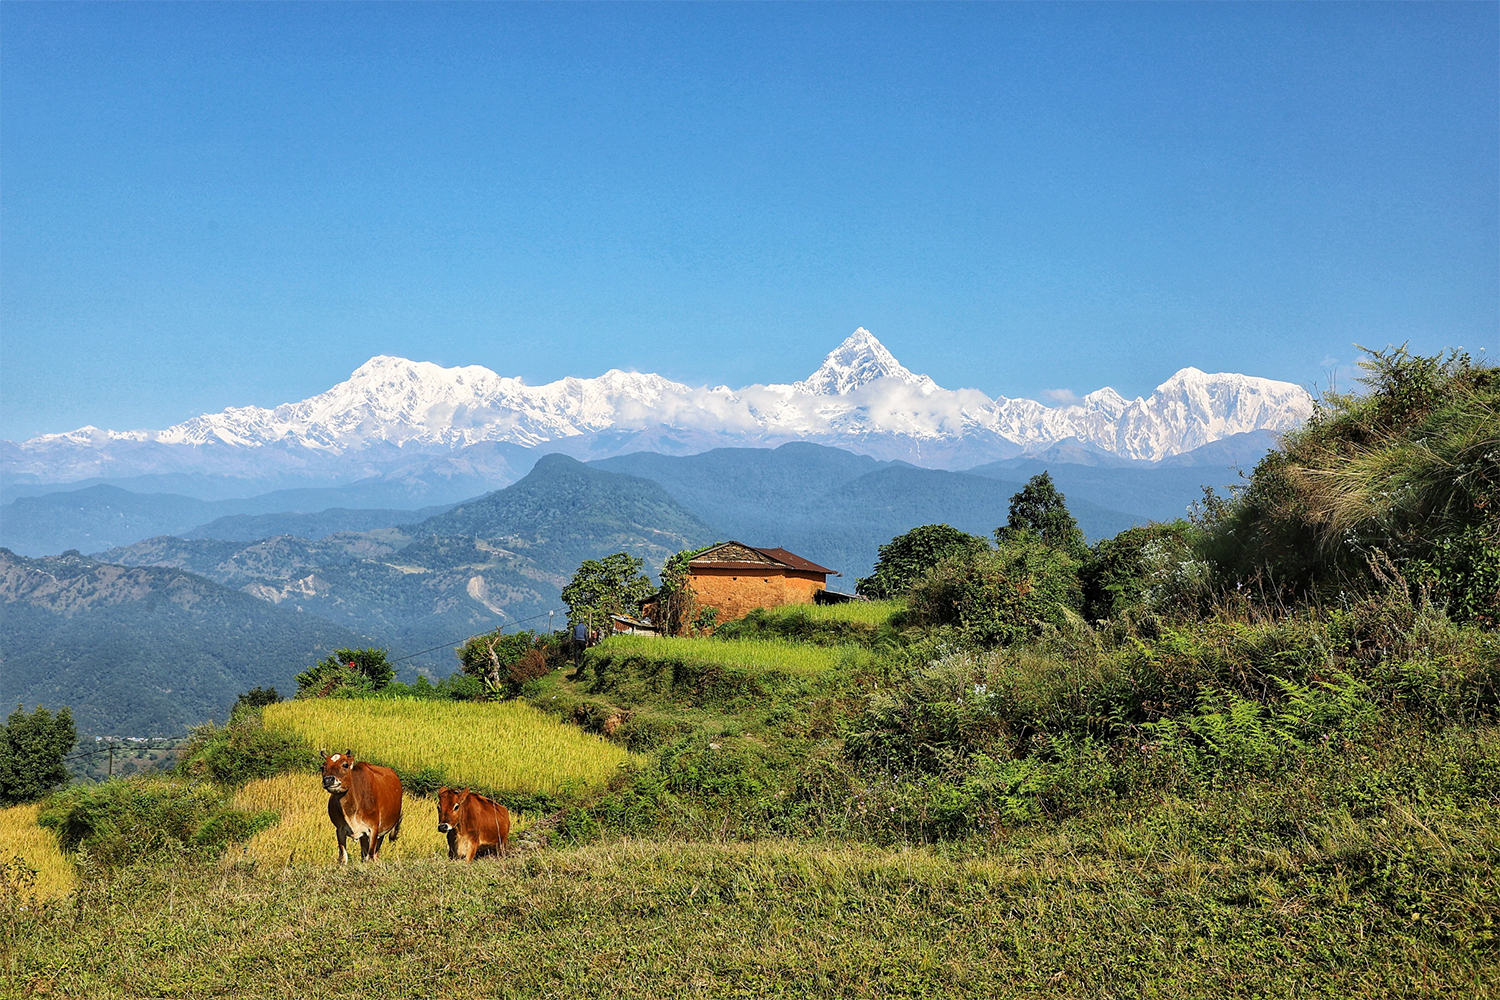 A view of the Himalayas from the green hills of Pokhara in Nepal